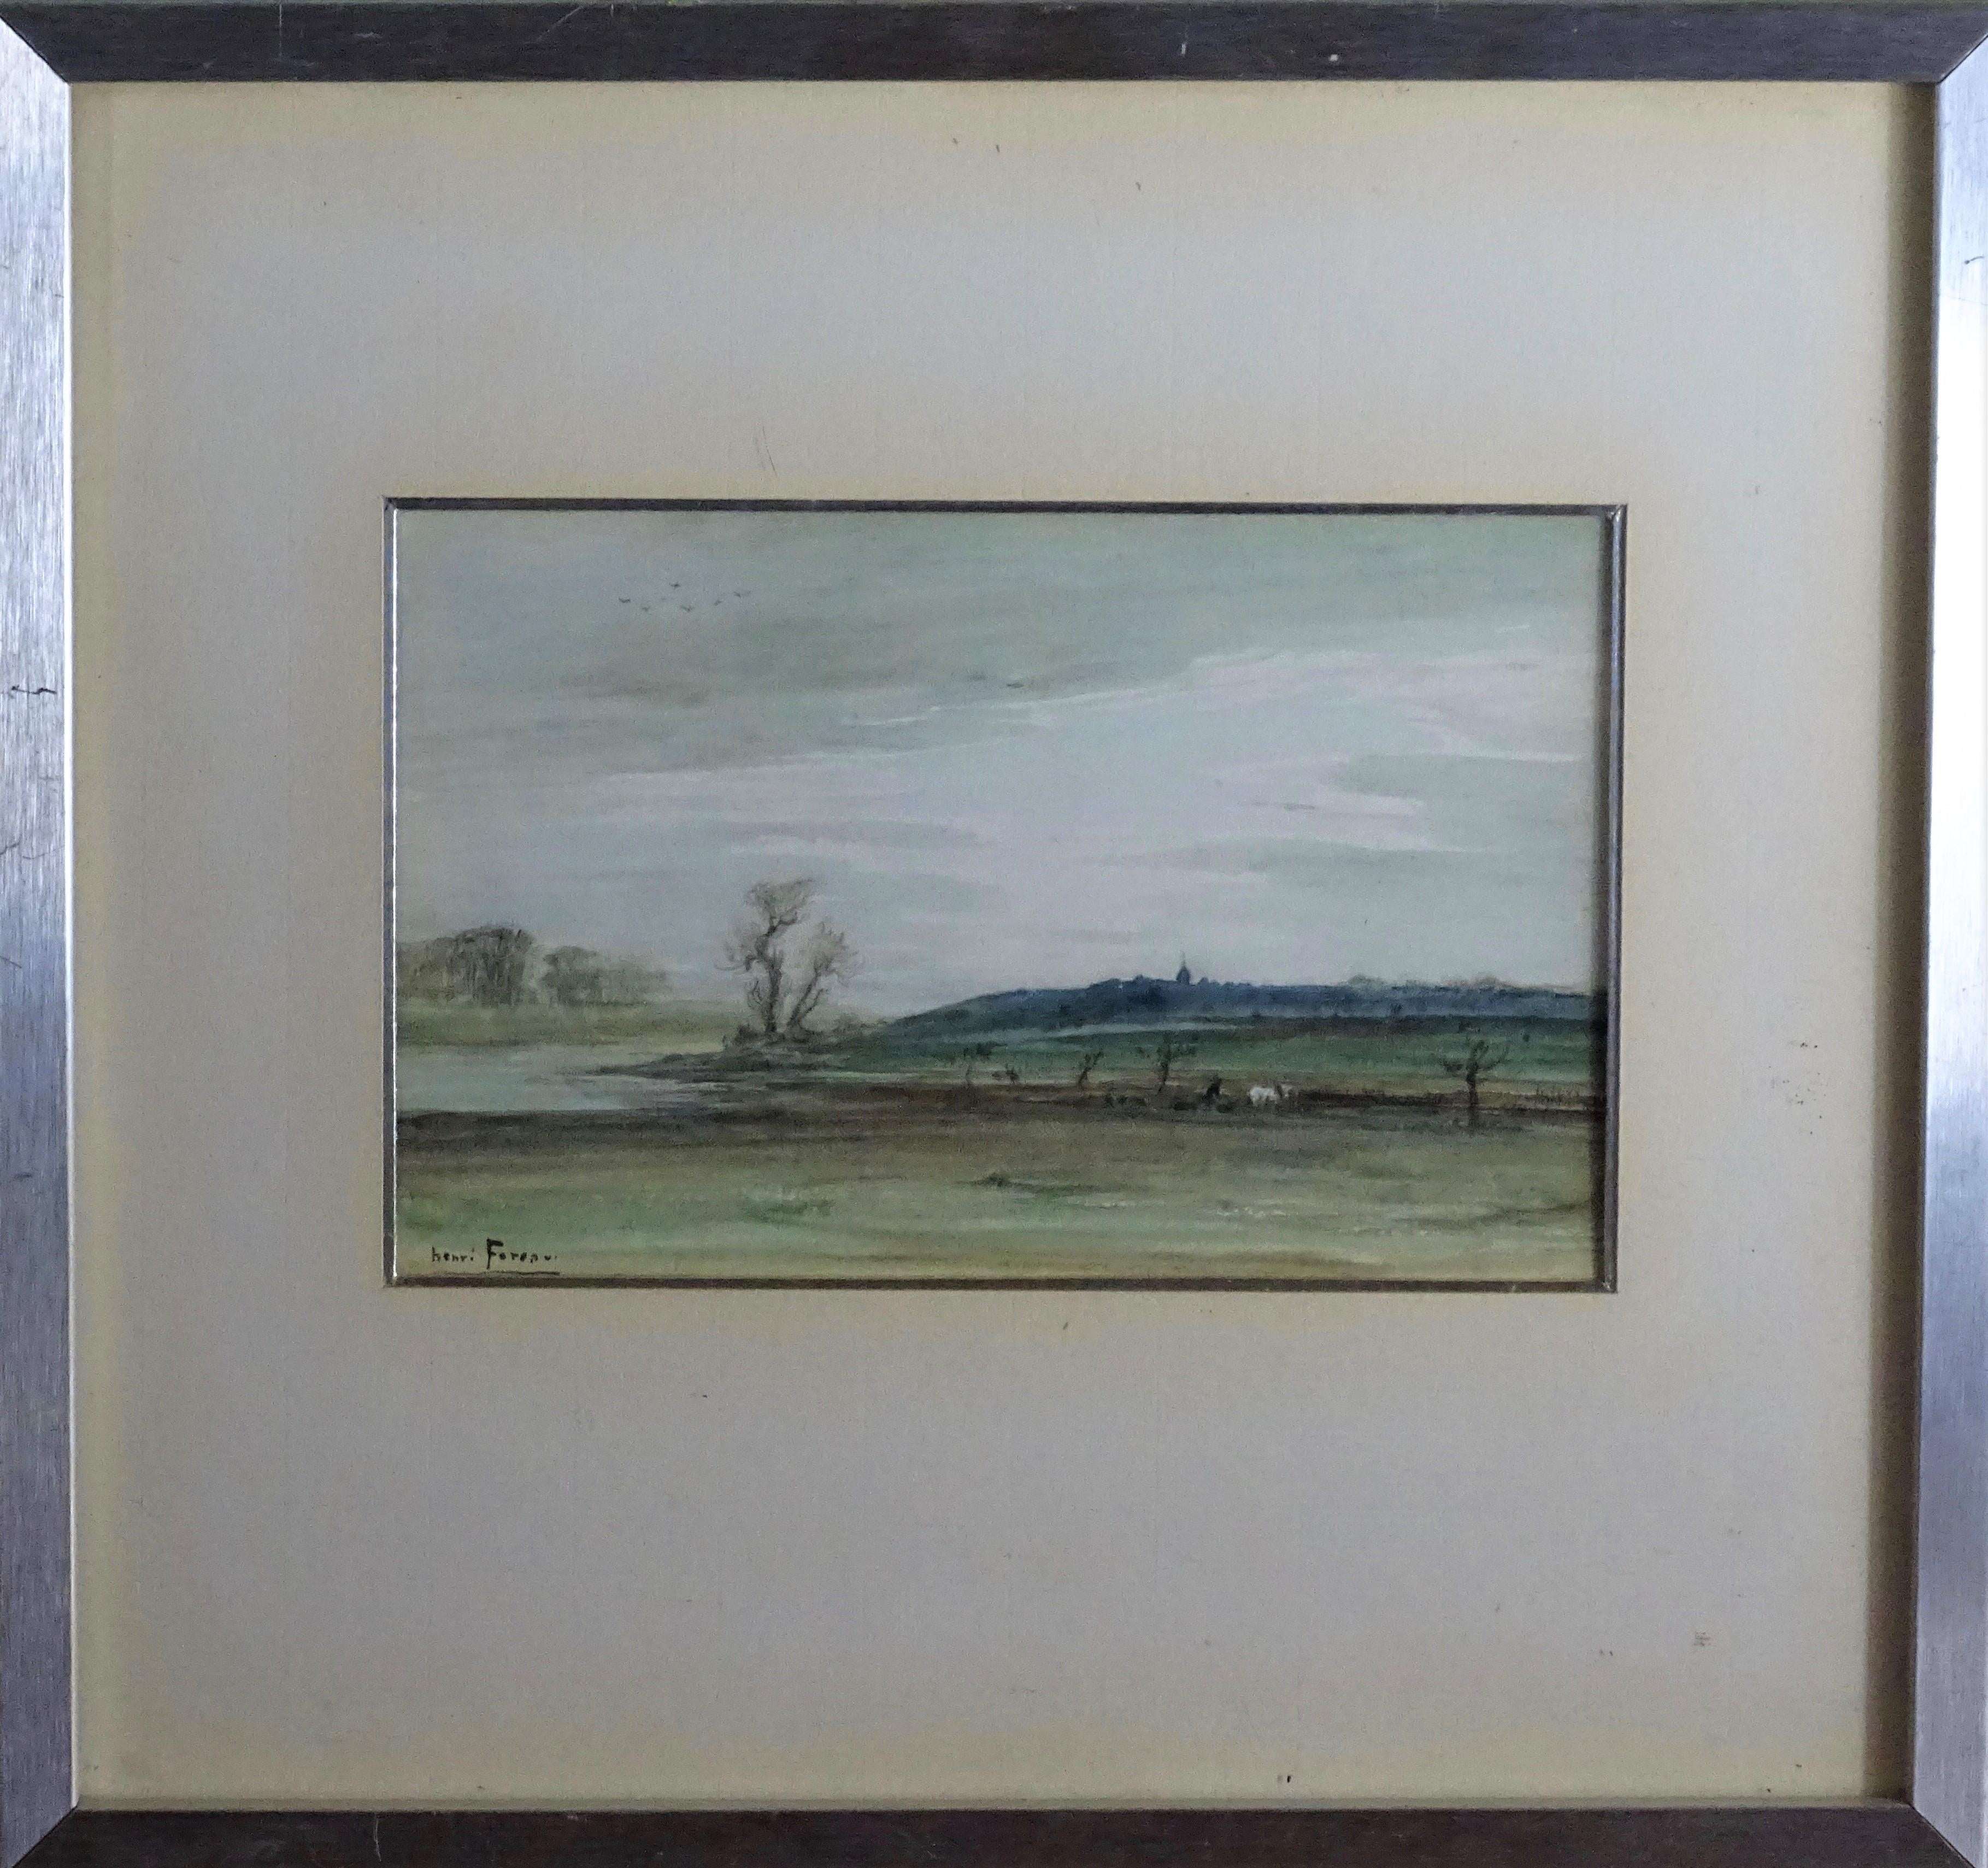 Watercolor on paper applied on panel, depicting Landscape, signed at the bottom left Henri Foreau (1866 - 1938).

Louis-Henri Foreau (1866-1938) was a French artist.
He often participated in the different Salon exhibitions in France and abroad. He